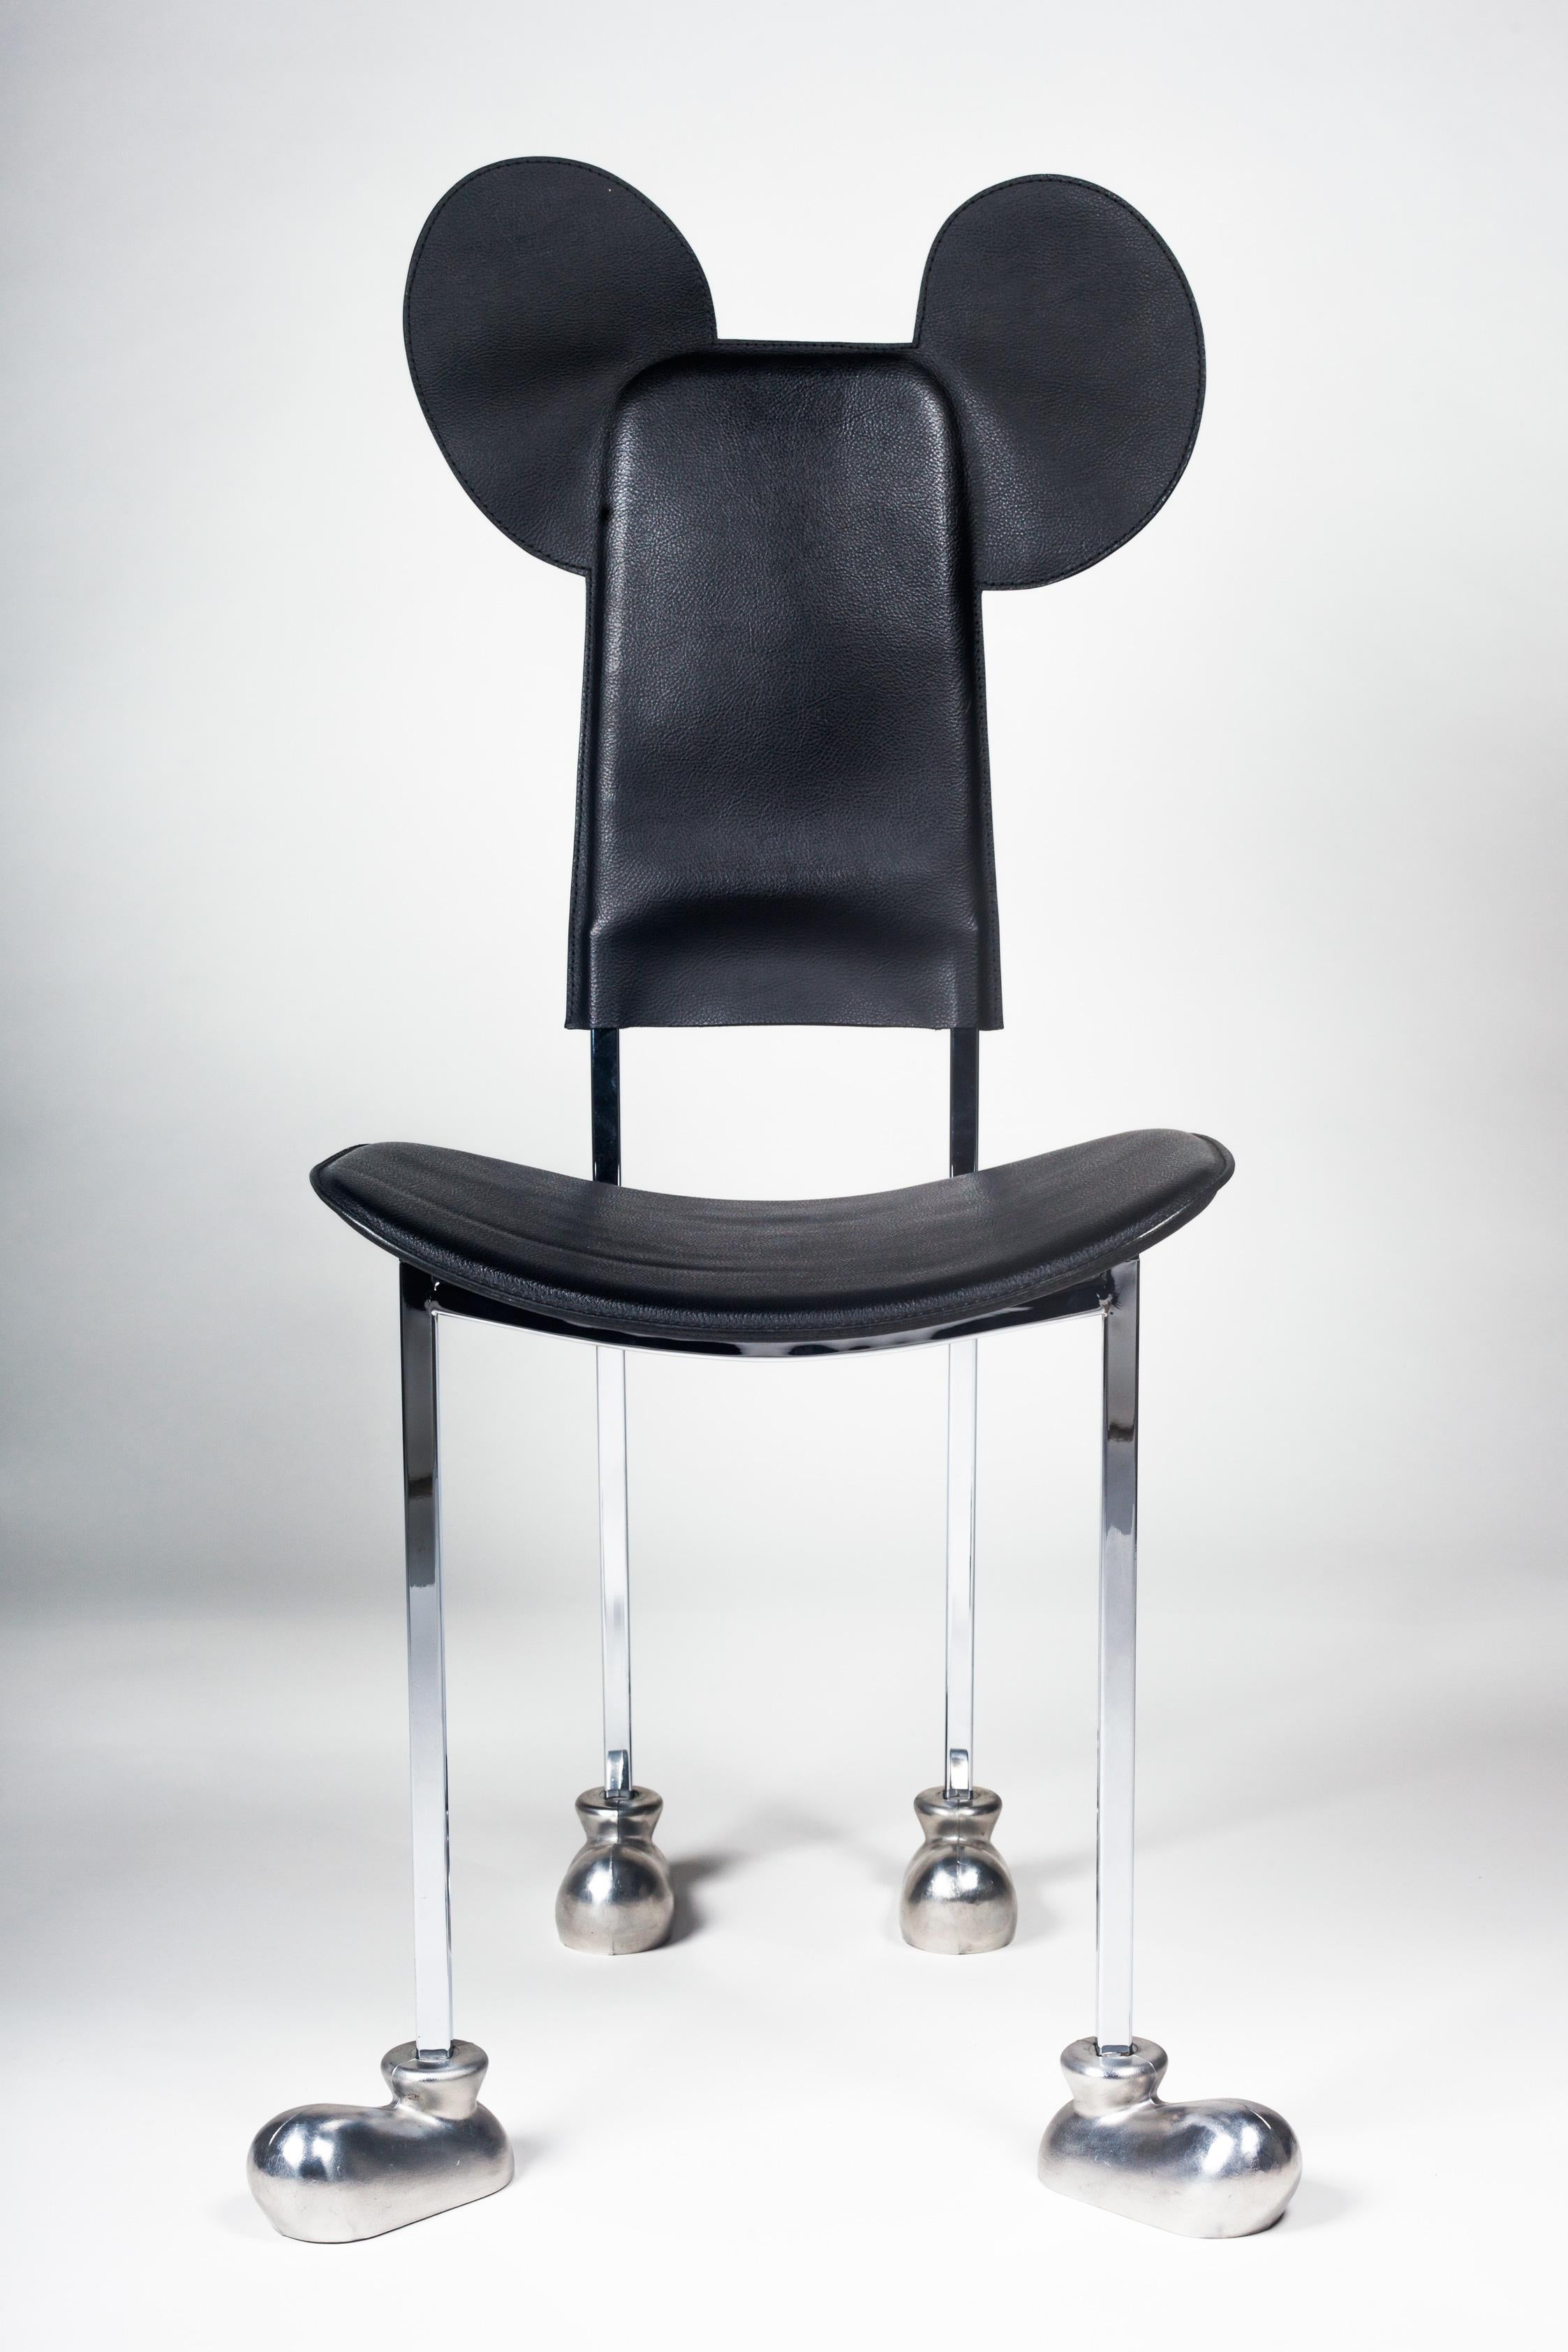 The Garriris chair, commonly called the Mickey chair, is an iconic postmodern design that Javier Mariscal made for his own brand, Akaba, in 1987. 

YEAR: 1987
COUNTRY: Spain
DIMENSIONS: H 38 in. x W 20.5 in. x D 21.5 in.
H 96.52 cm x W 52.07 cm